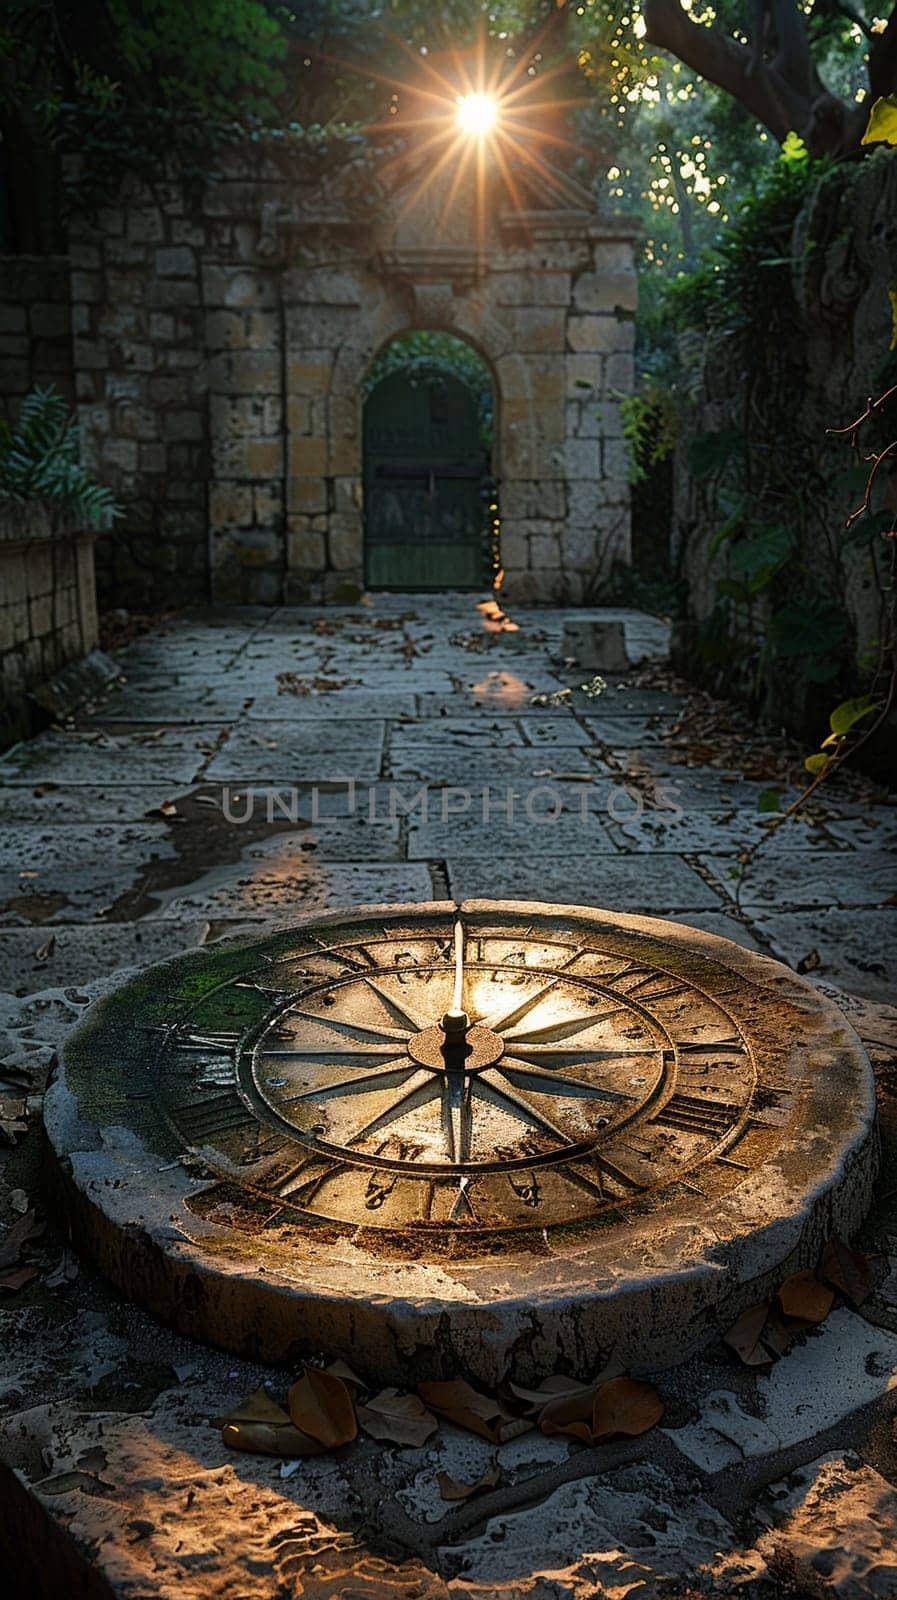 Sundial Casting Time's Shadow on a Sundrenched Patio, The gnomon blurs with the stone, ancient timekeeping amid modernity.